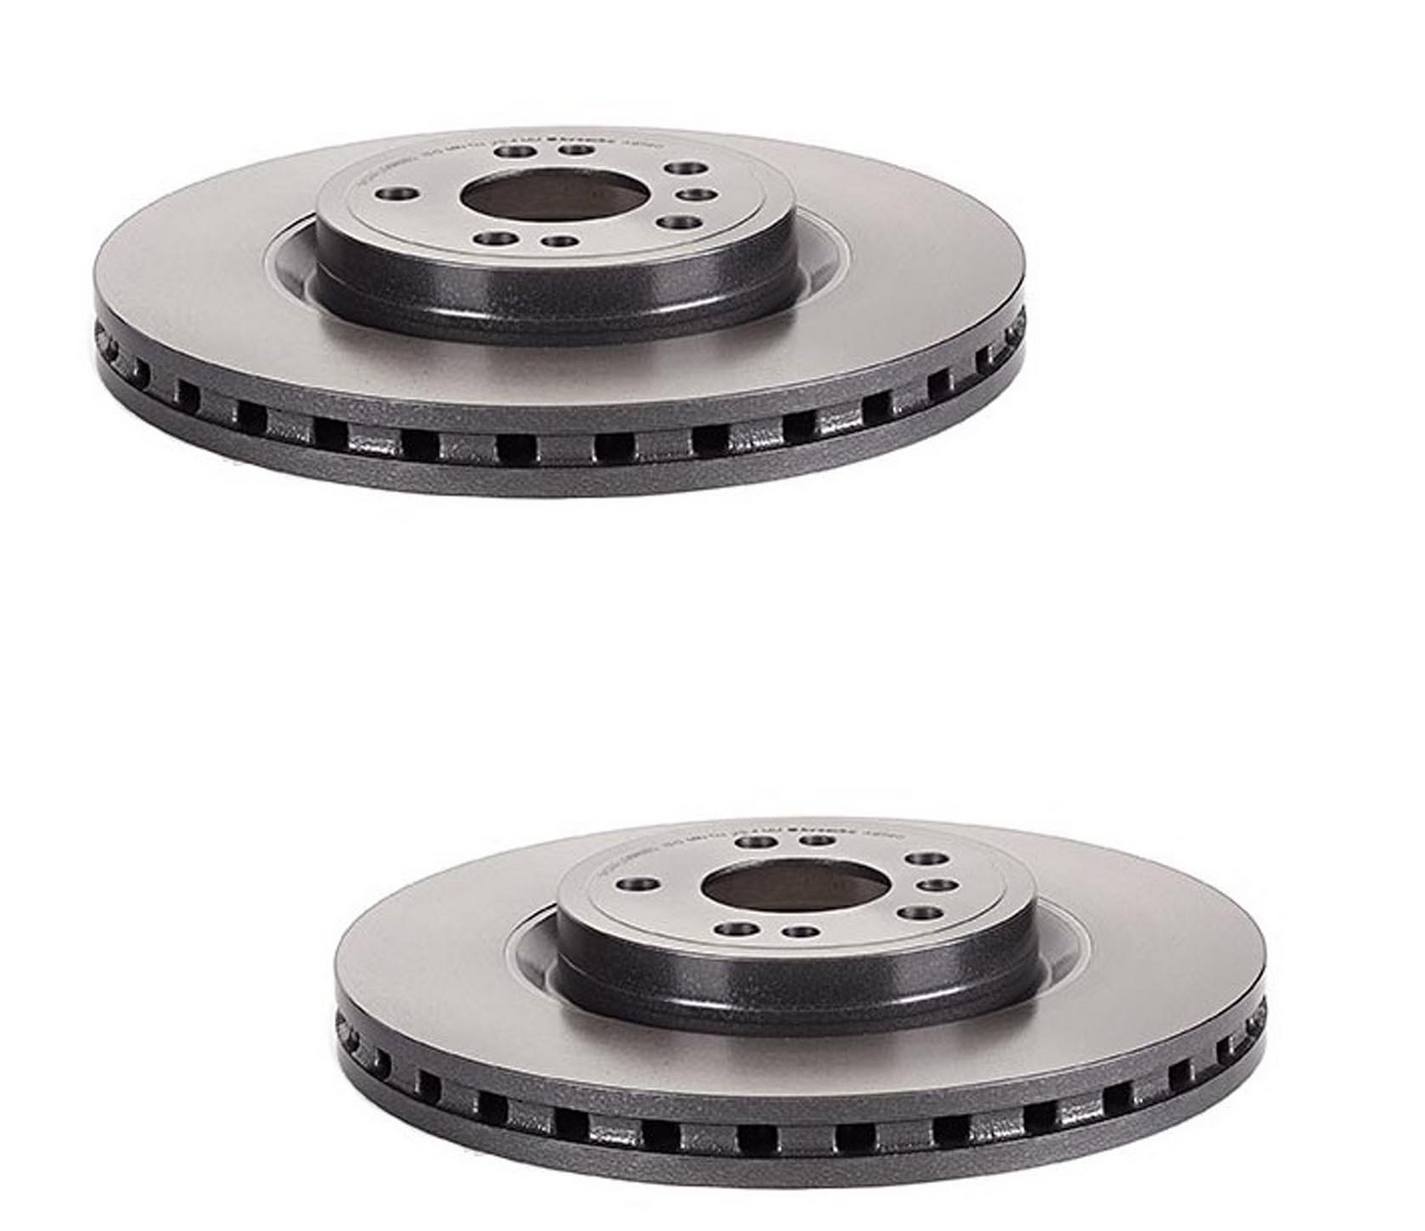 Mercedes Brakes Kit - Brembo Pads and Rotors Front (330mm) (Low-Met) 1664211300 - Brembo 3342284KIT